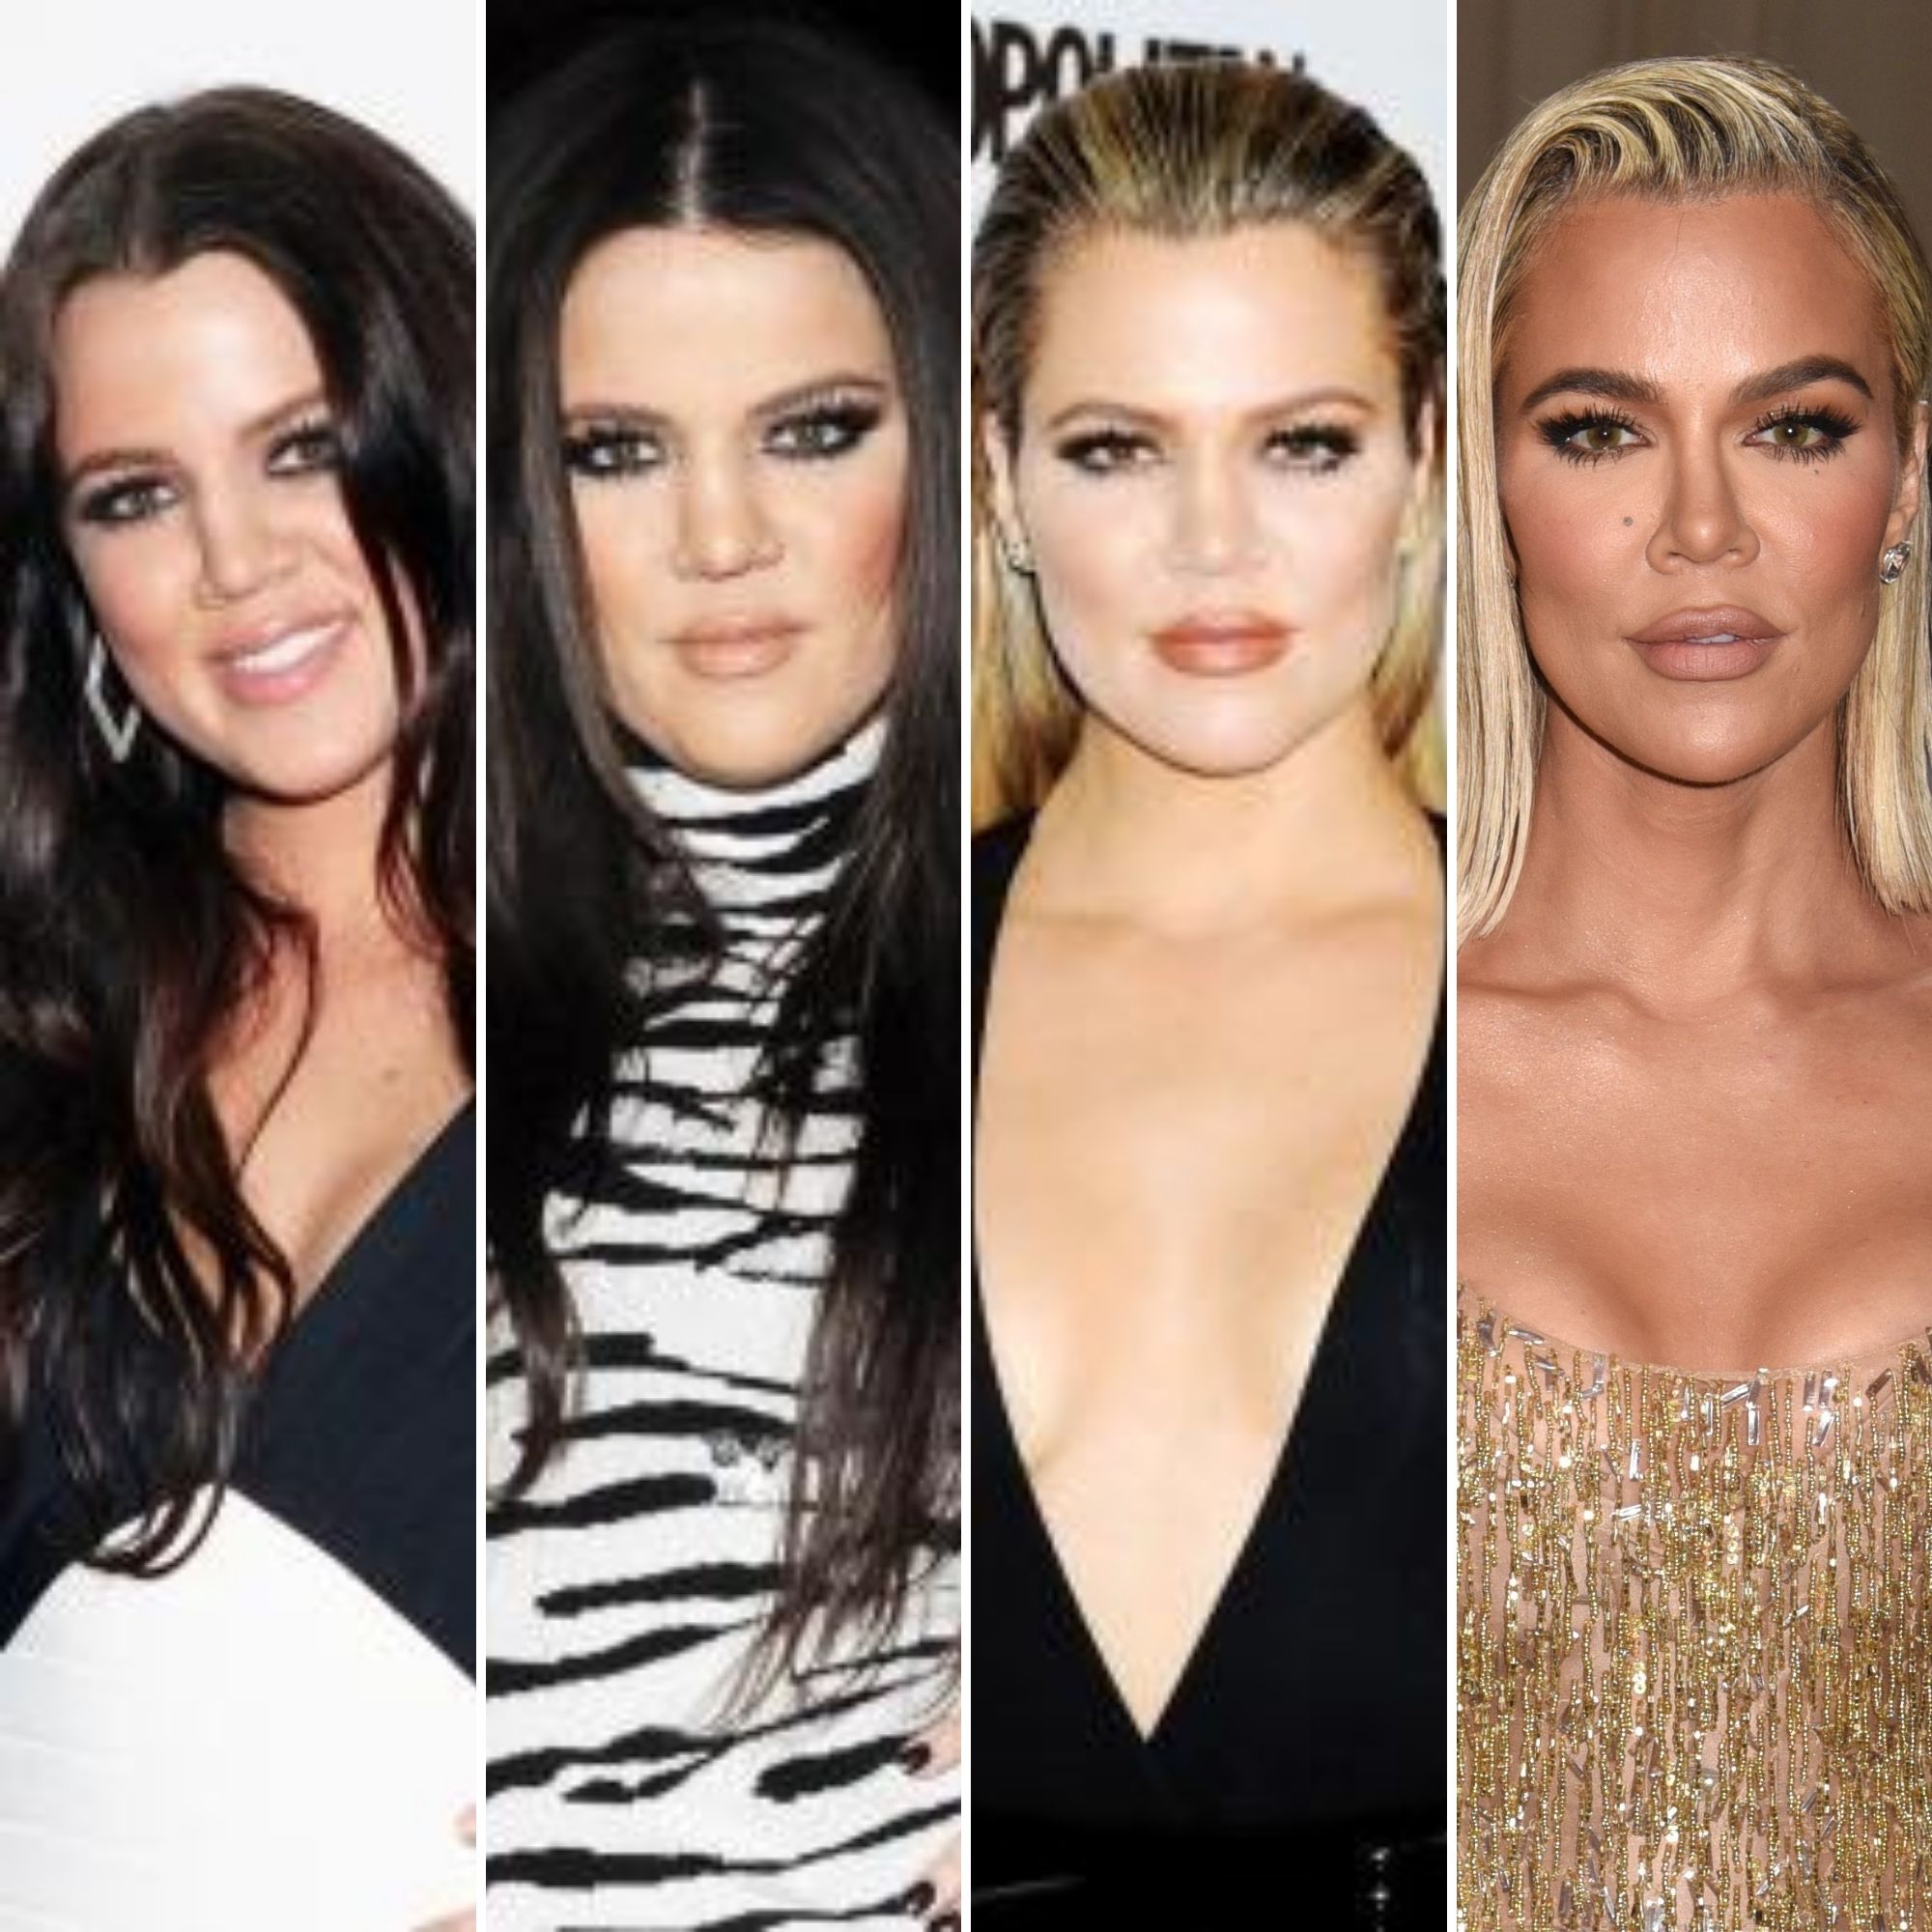 Kardashian-Jenners Plastic Surgery: Before and After Photos | Life & Style